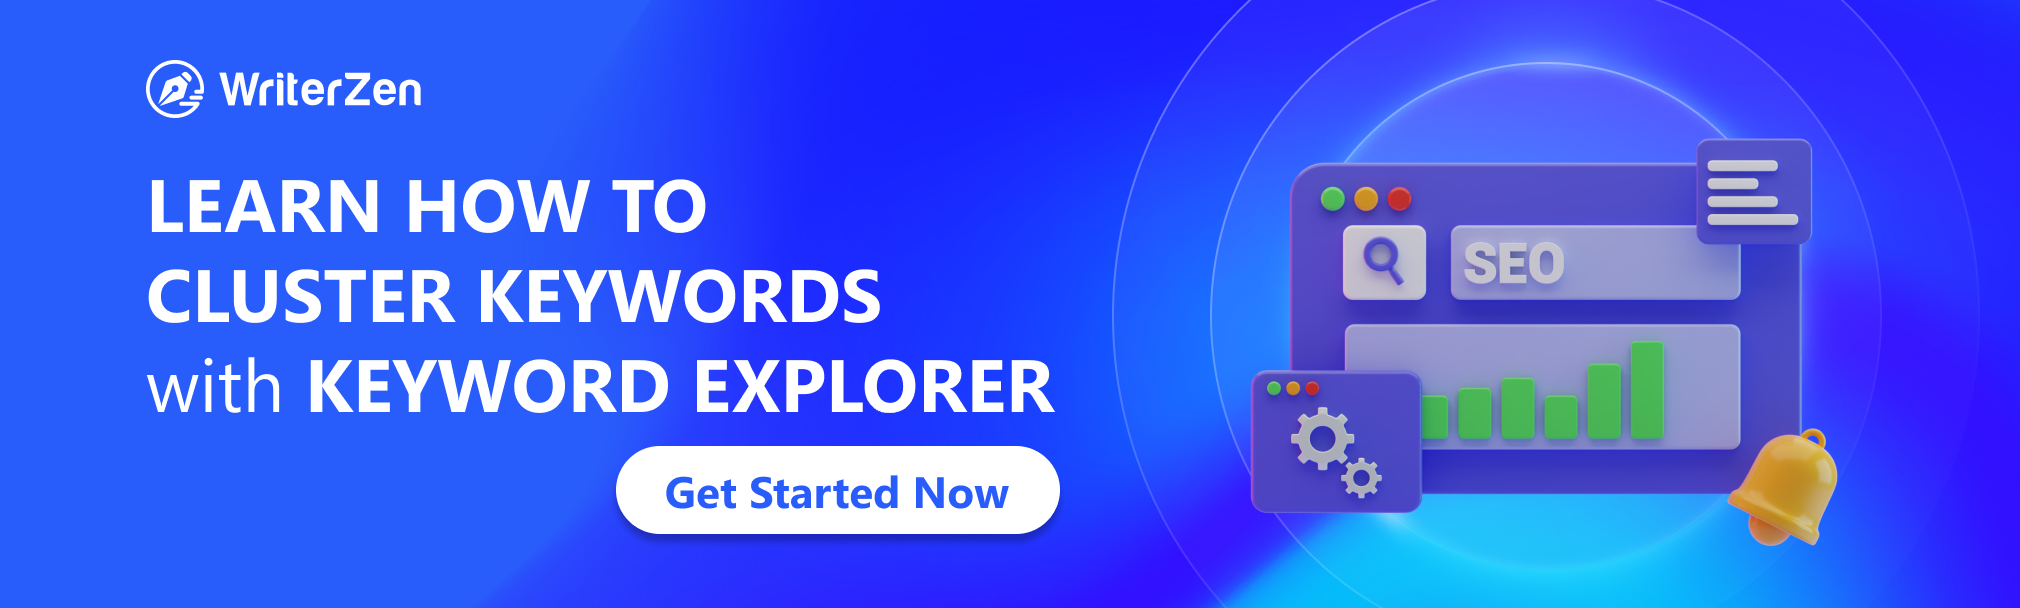 Learn How to Cluster Keywords with Keyword Explorer